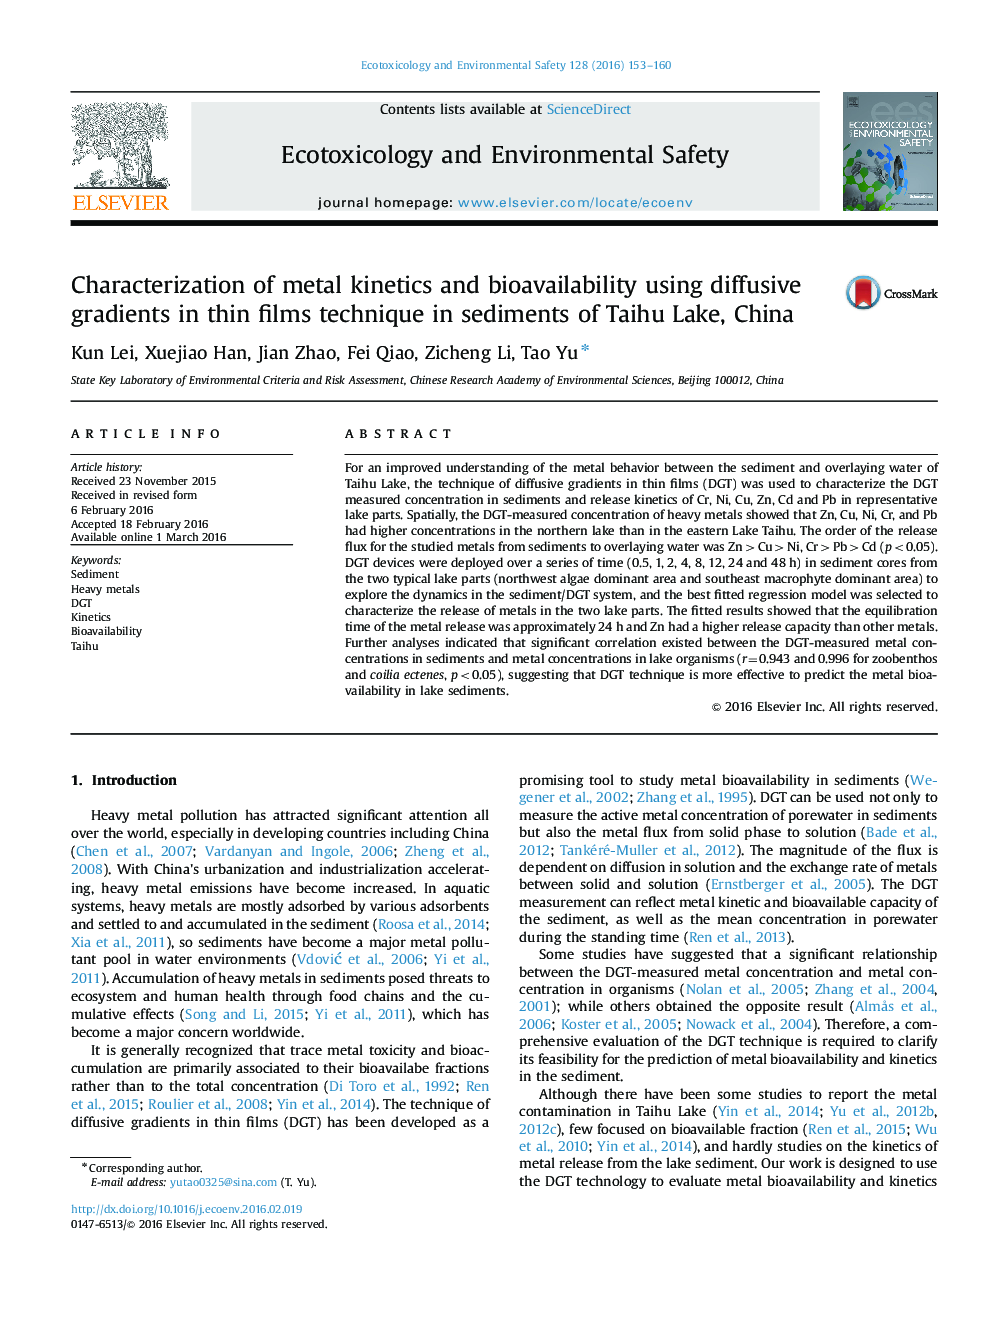 Characterization of metal kinetics and bioavailability using diffusive gradients in thin films technique in sediments of Taihu Lake, China